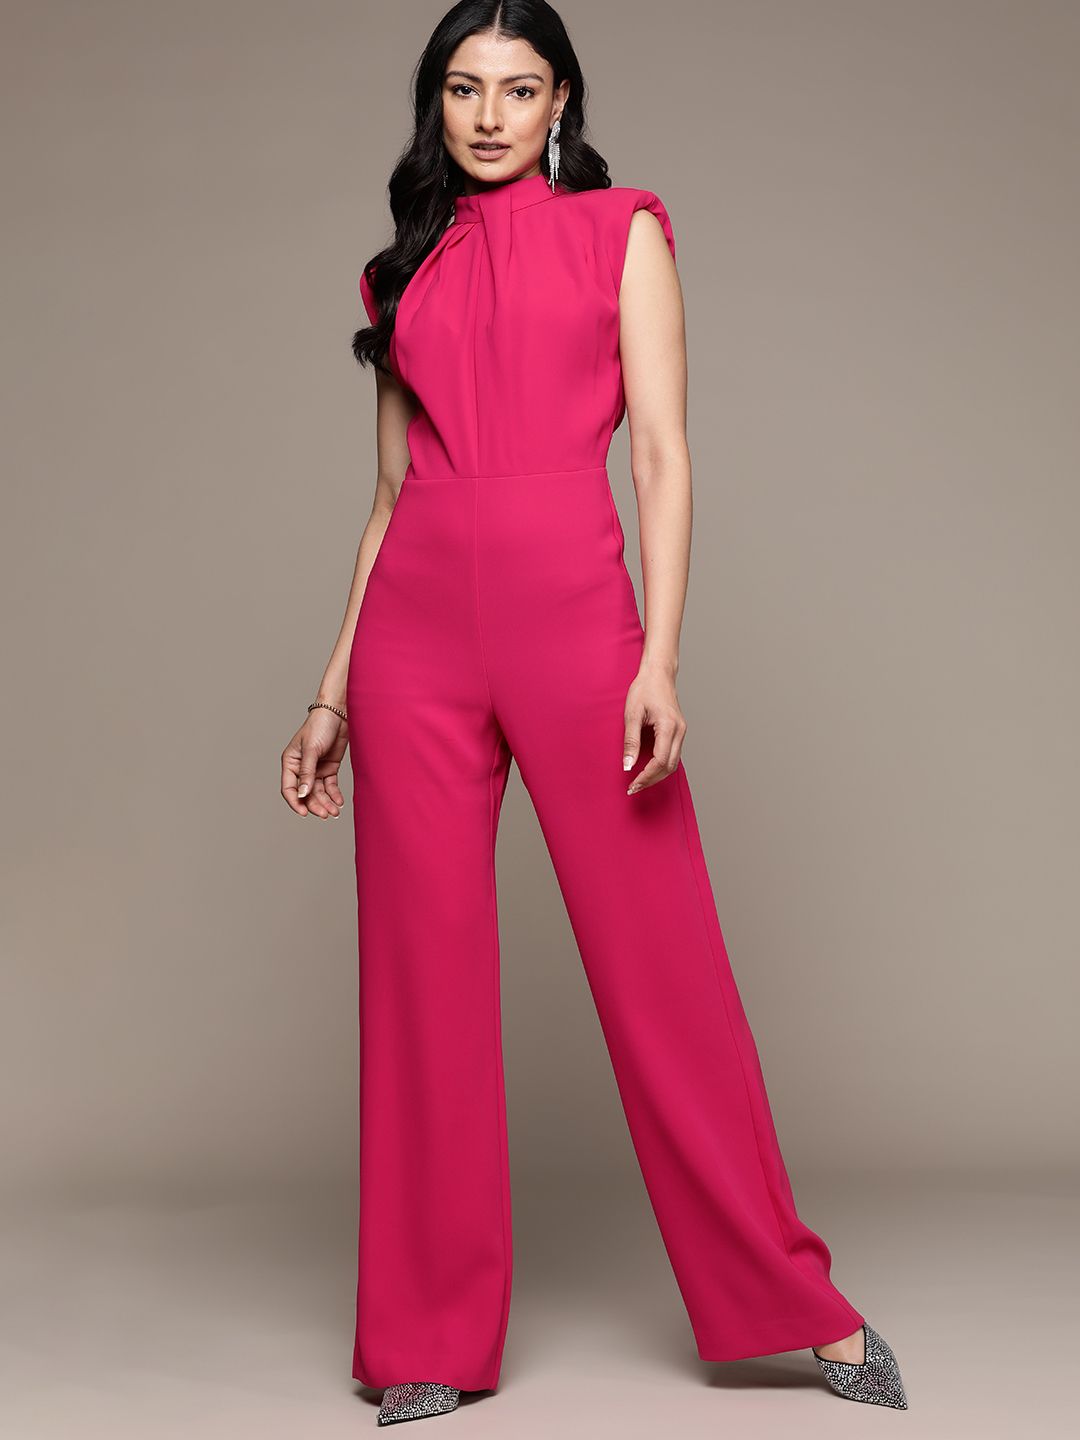 MANGO Solid Flared Jumpsuit with Shoulder Pads Price in India